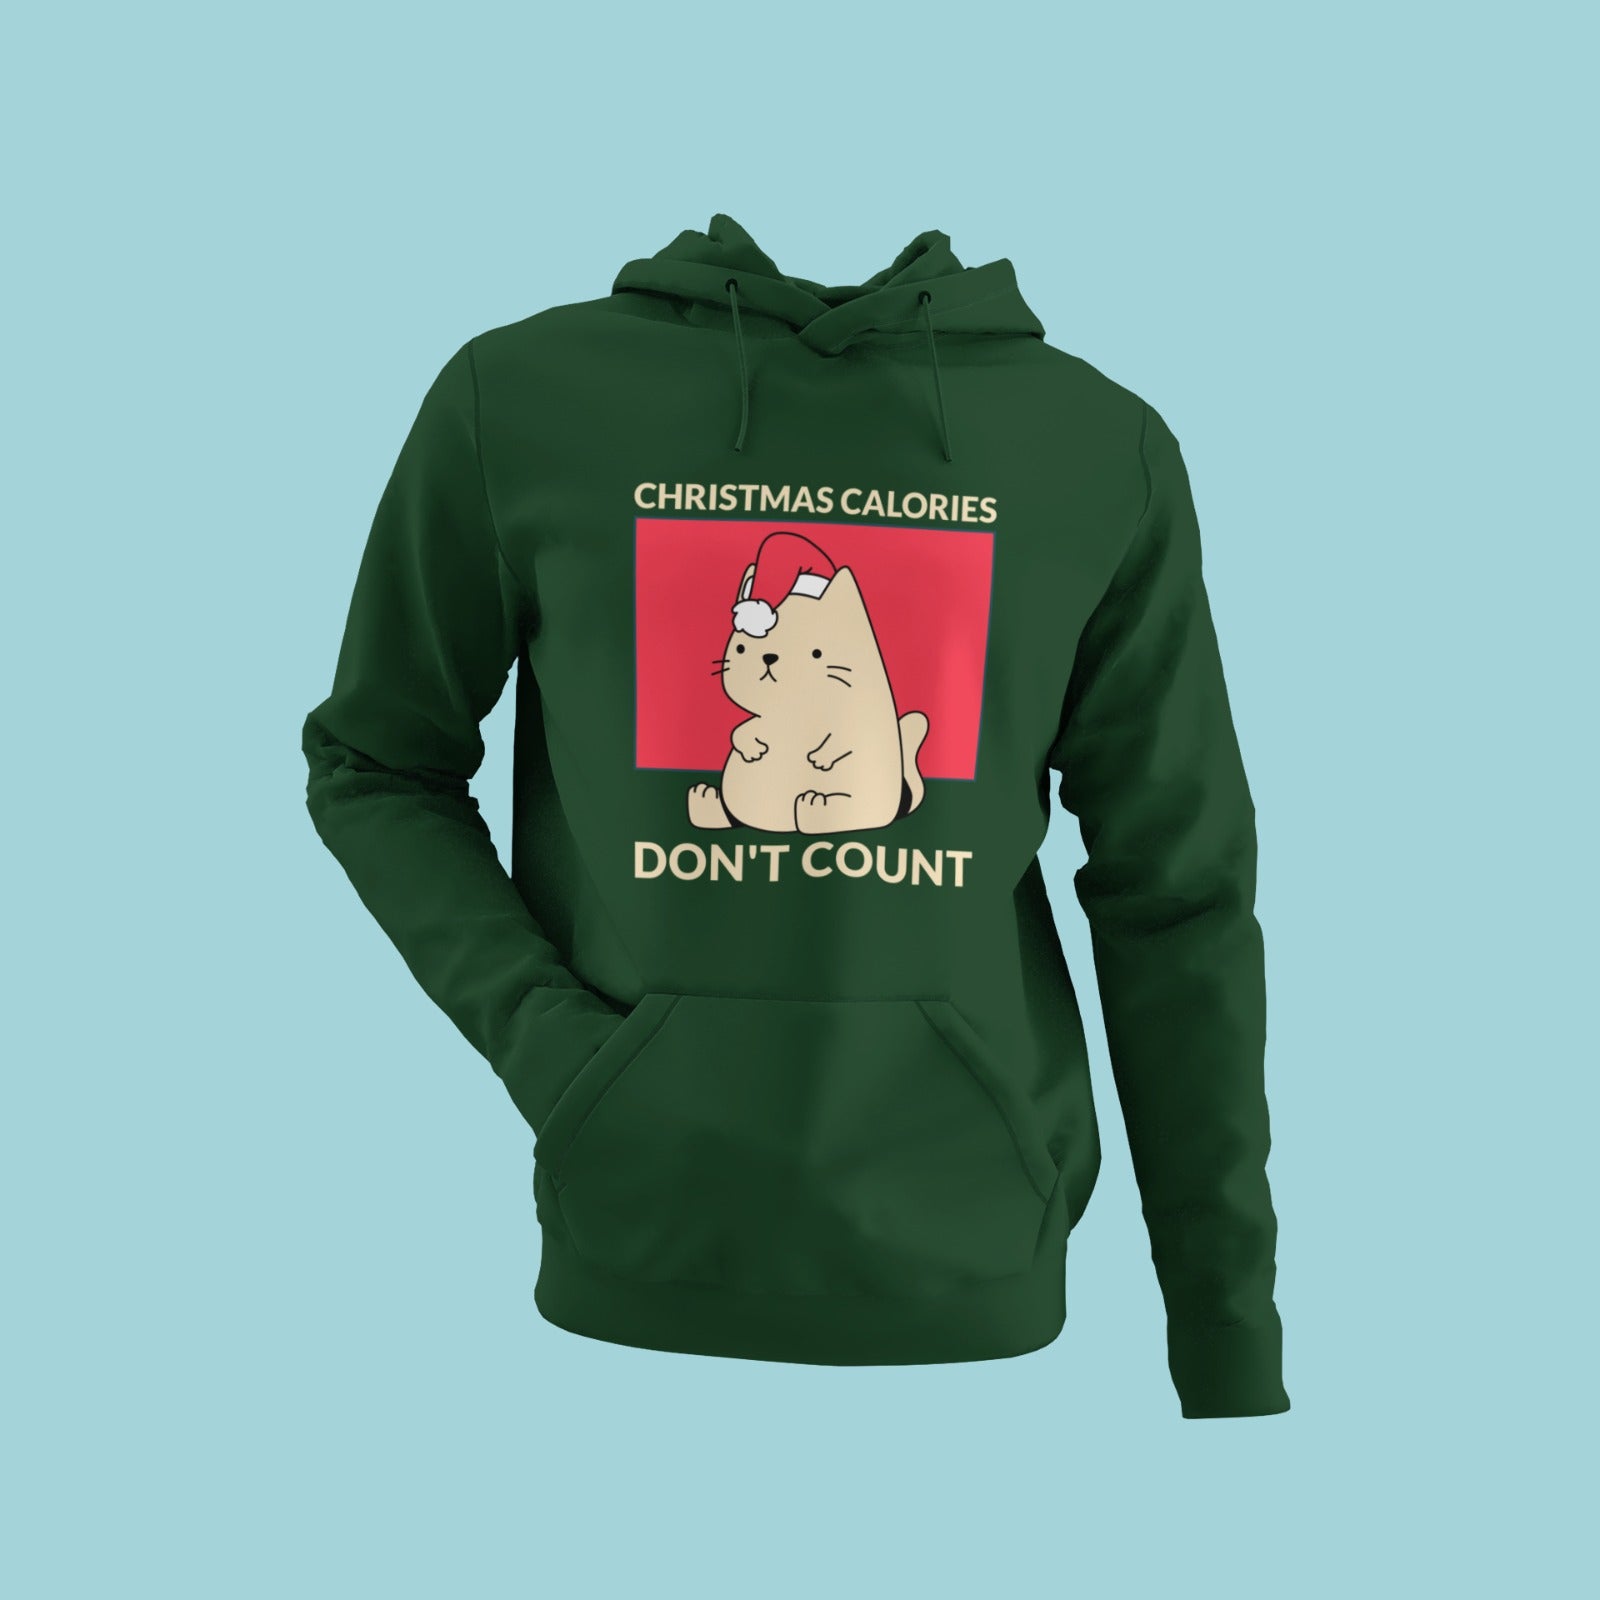 Get into the holiday spirit with this olive green hoodie featuring a chubby cat wearing a Christmas cap holding its filled tummy with a "Christmas calories don't count" message. Stay cozy and stylish all season long with this comfortable and festive hoodie. Order now to add some holiday cheer to your wardrobe!